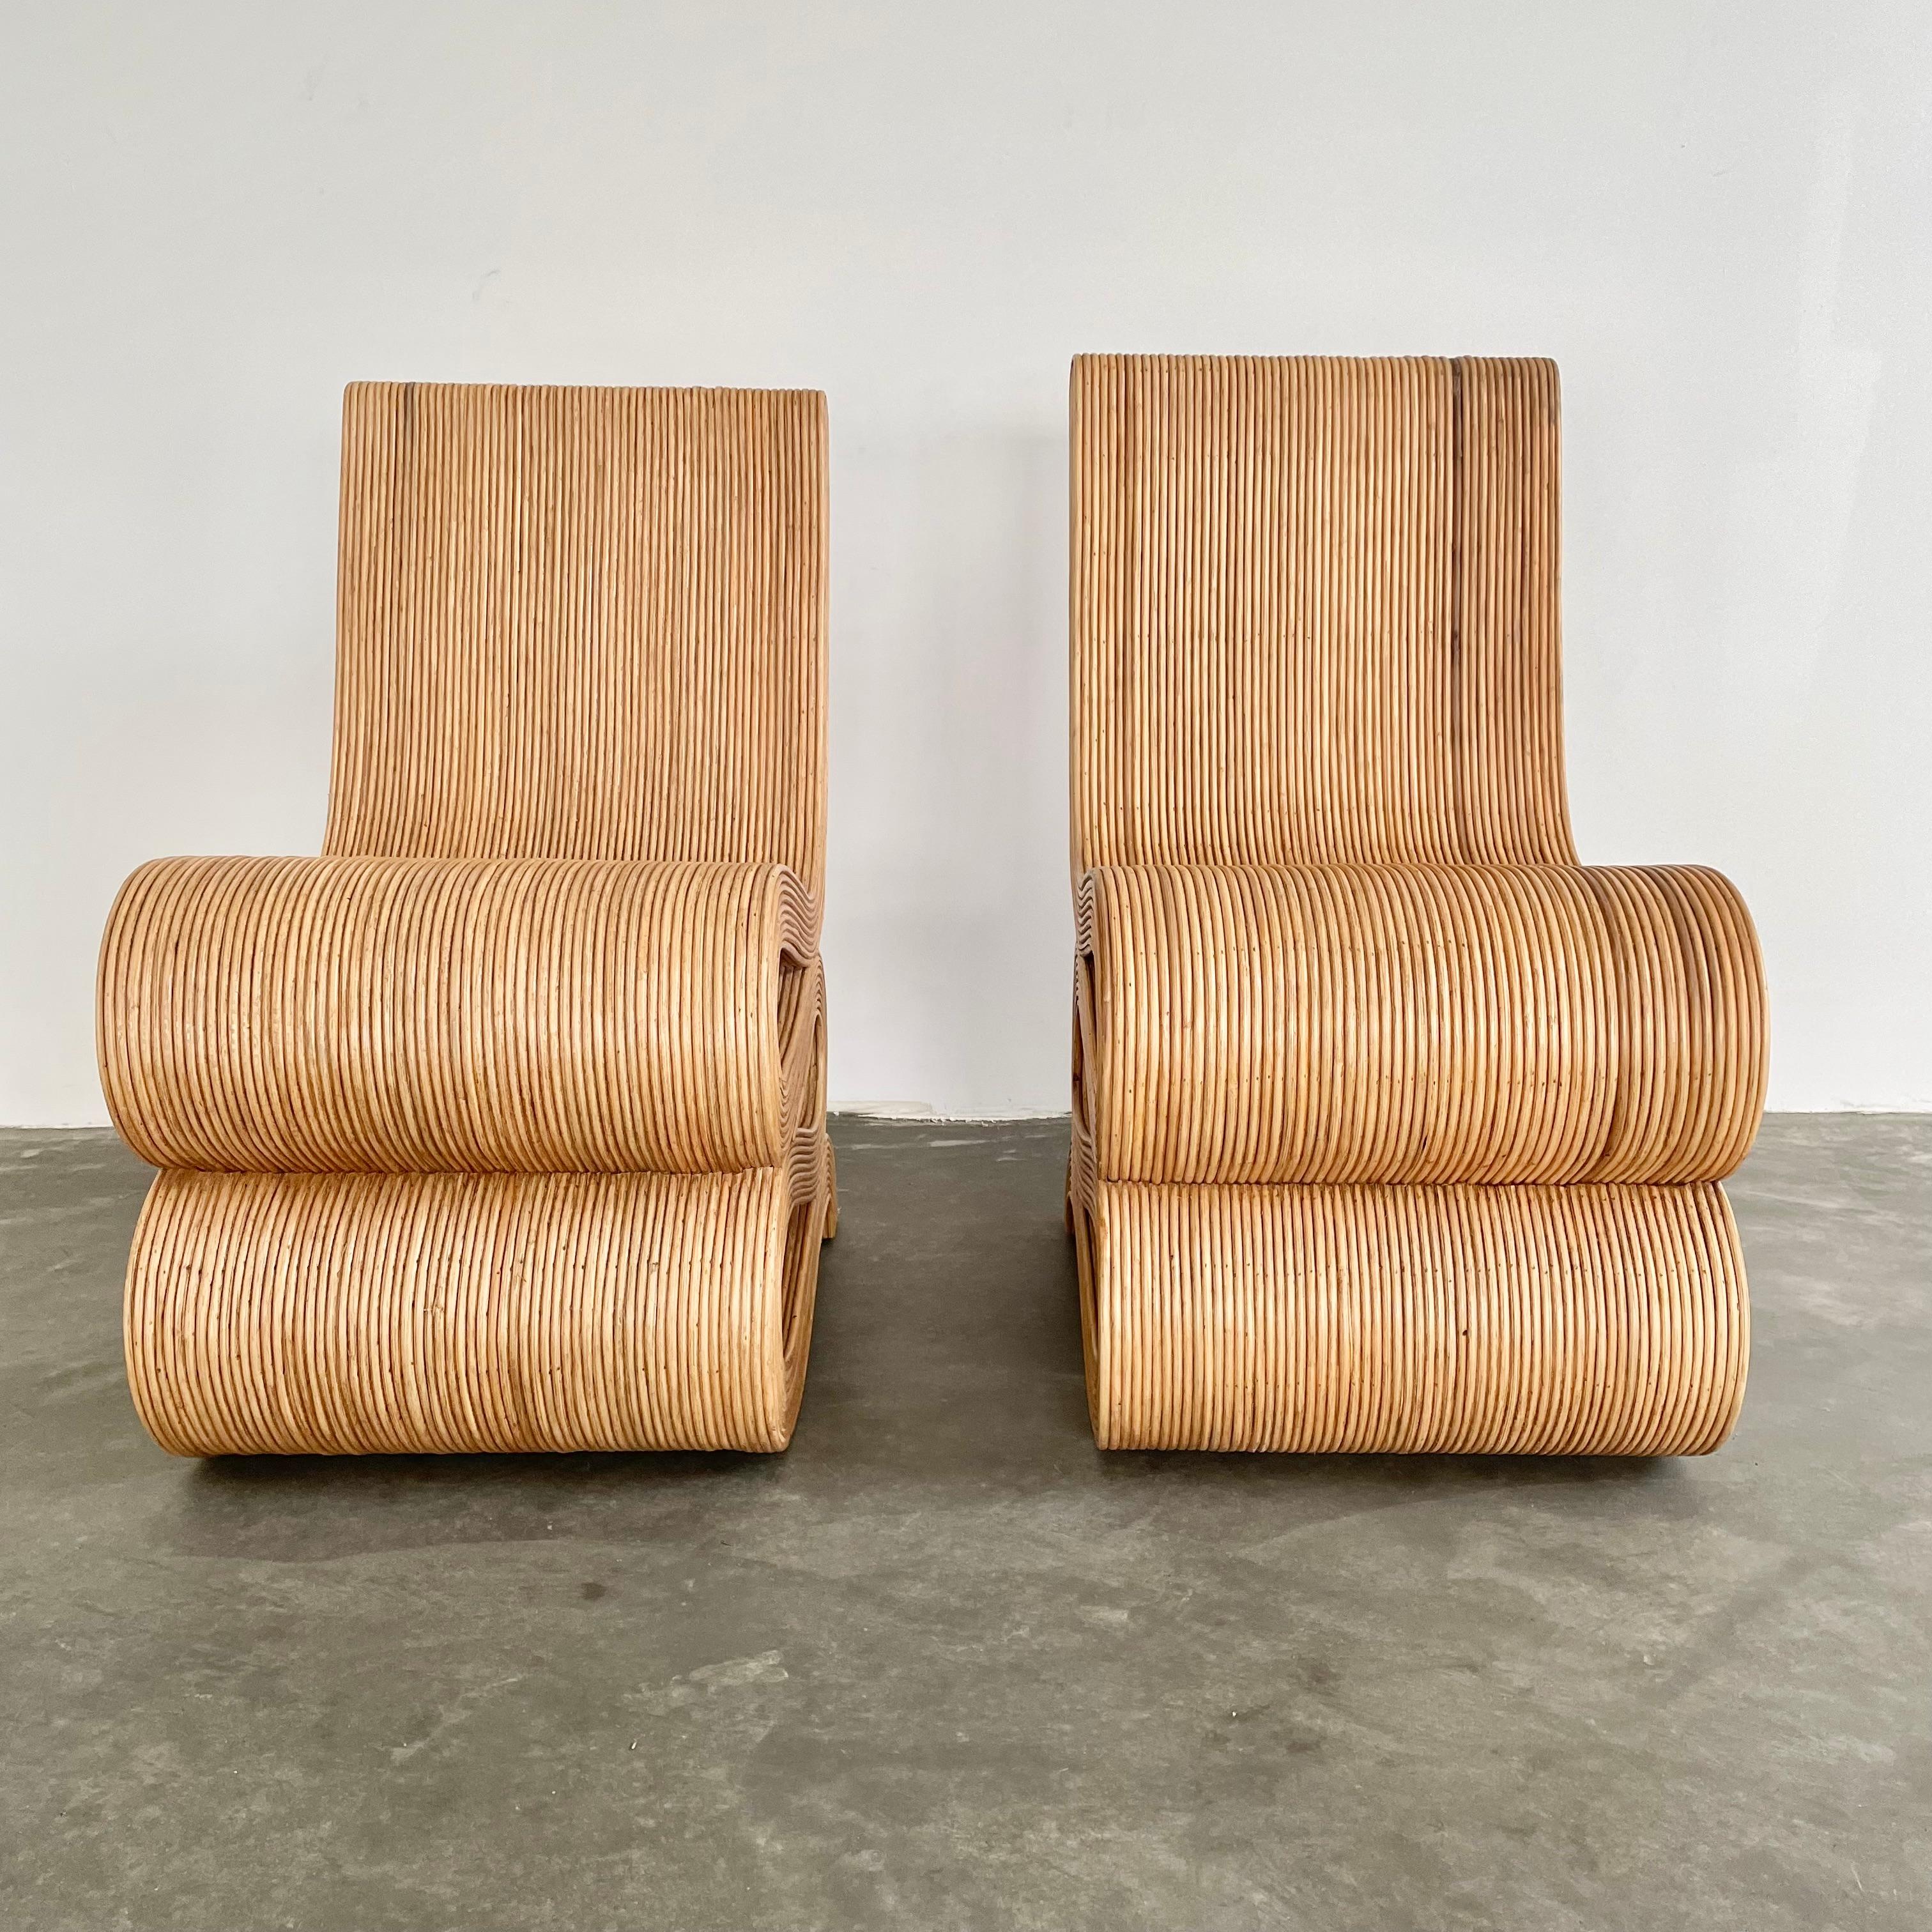 North American Pair of Pencil Rattan Chairs in the Style of Frank Gehry For Sale